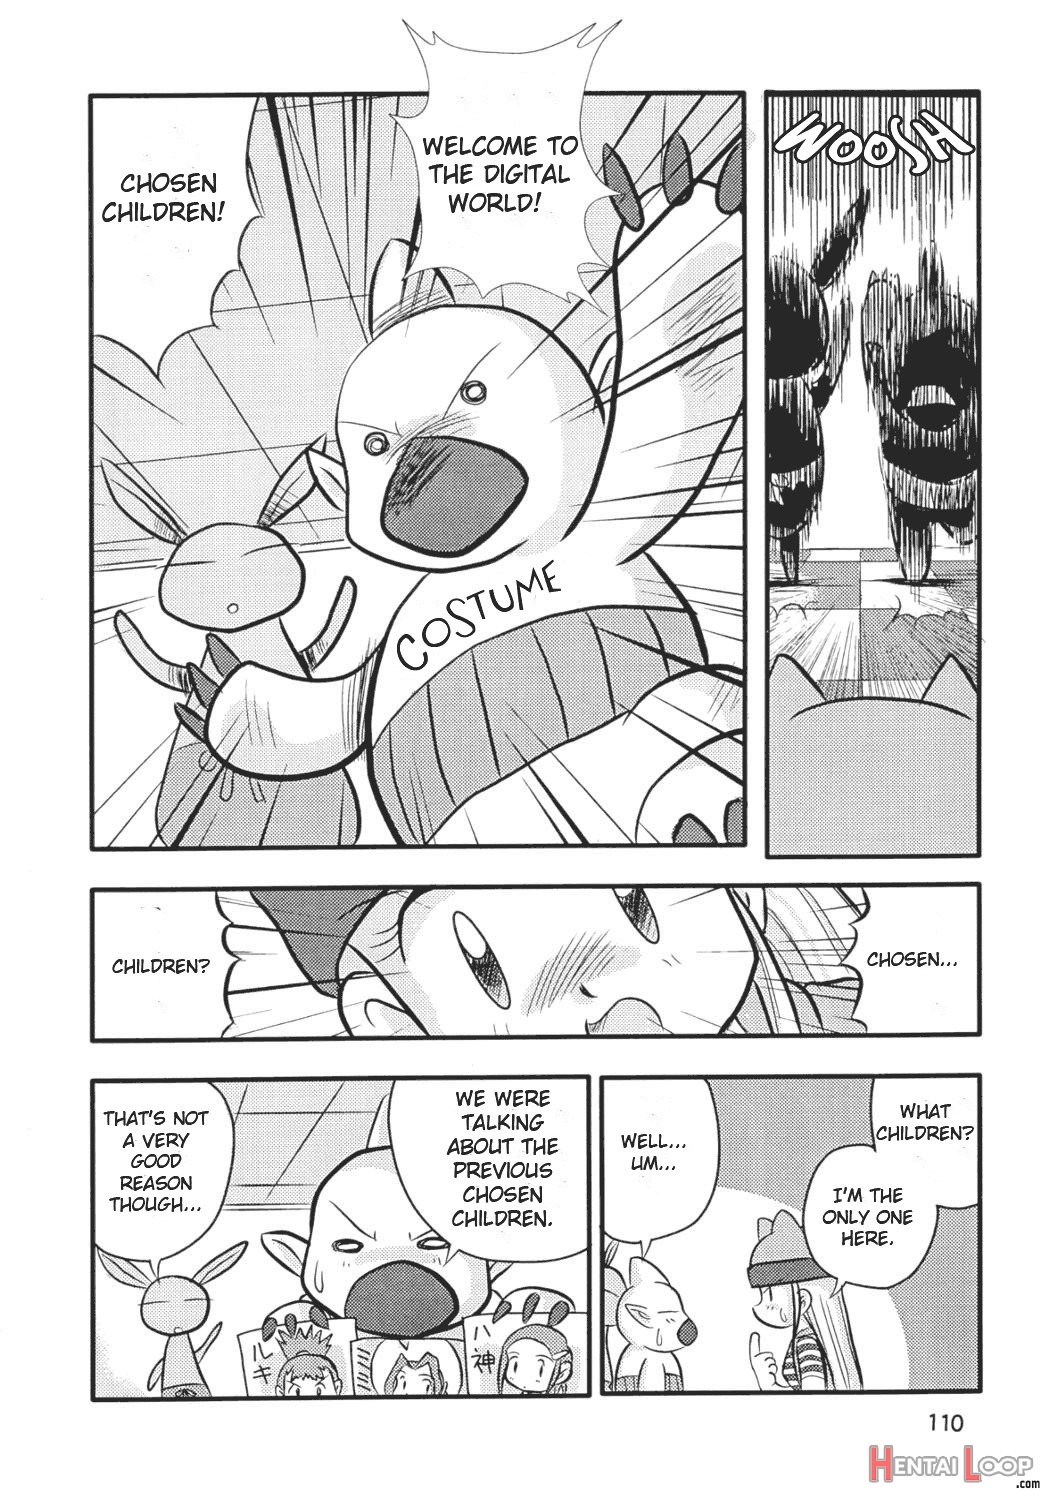 Pachimon Frontier page 5